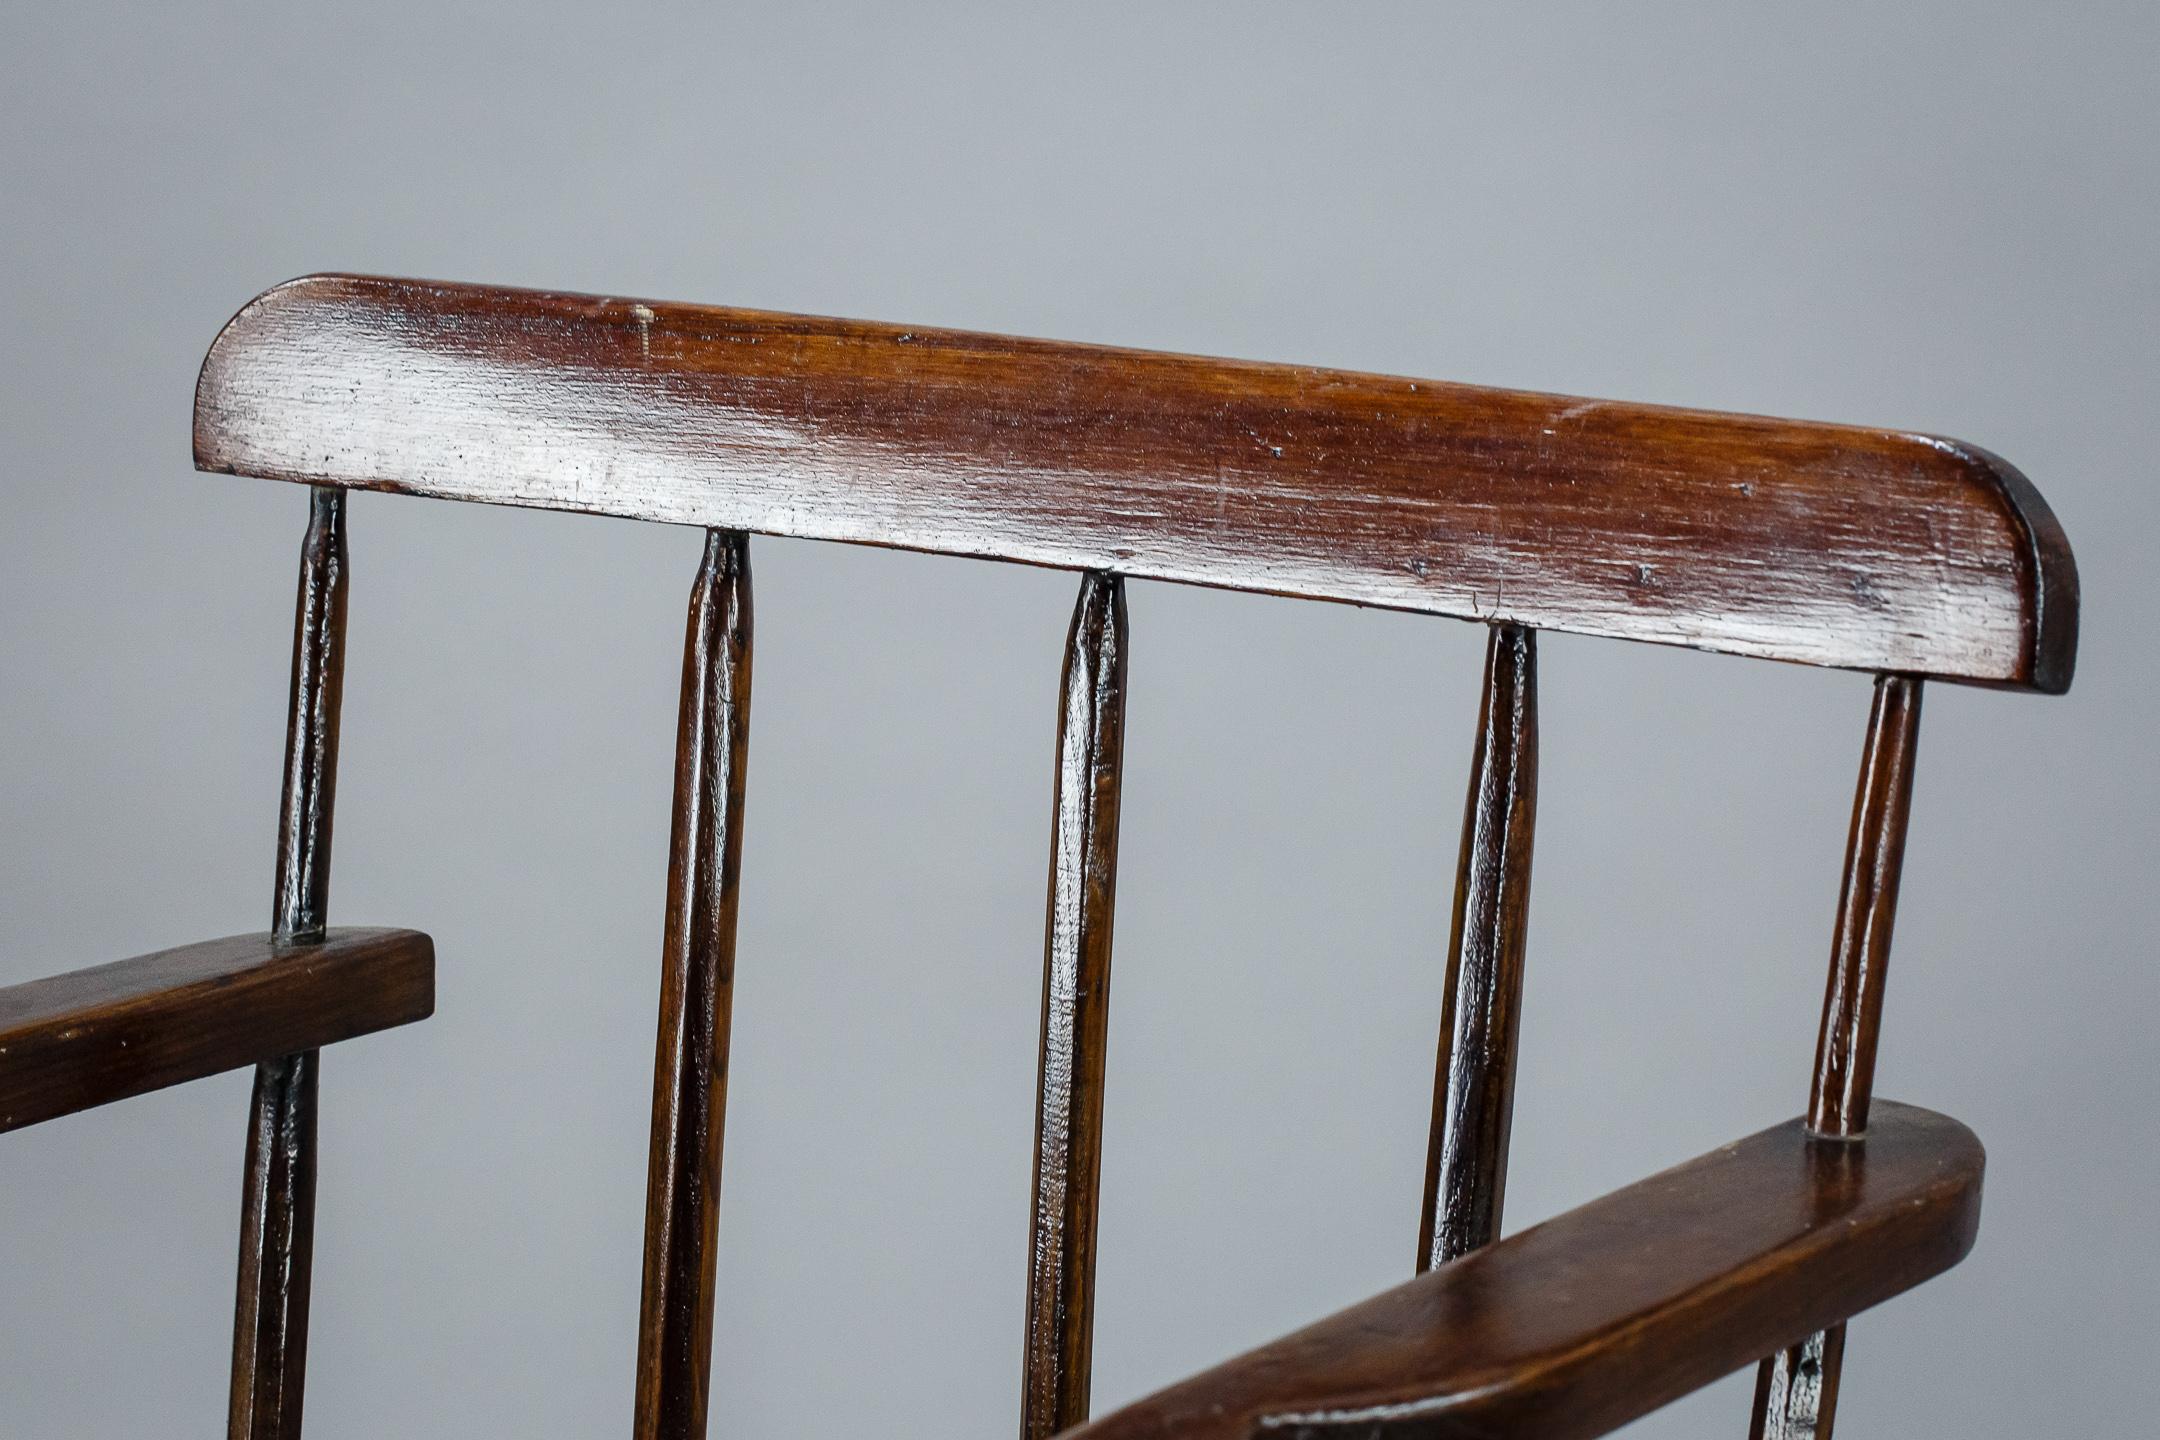 20th Century Large Scale Irish Stick or Hedge Chair